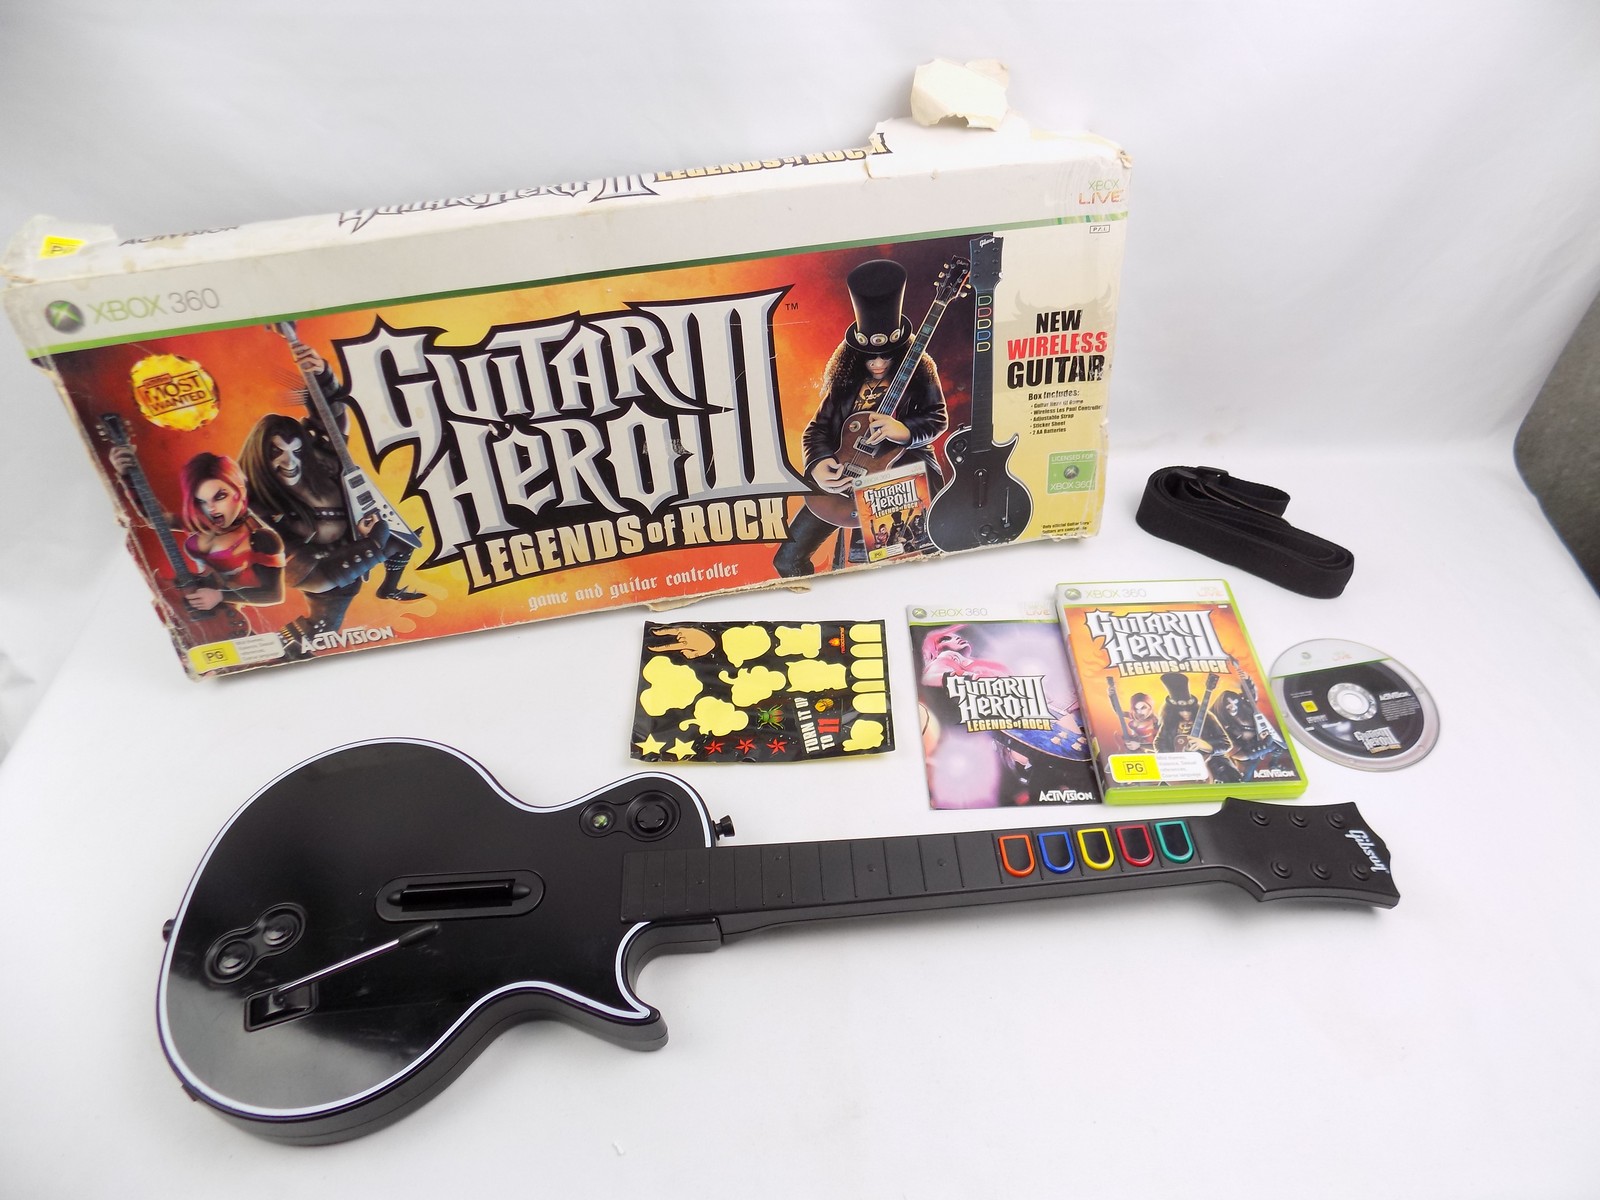 Like New Boxed Xbox 360 Guitar Hero III 3 Legends Of Rock Game and Guitar